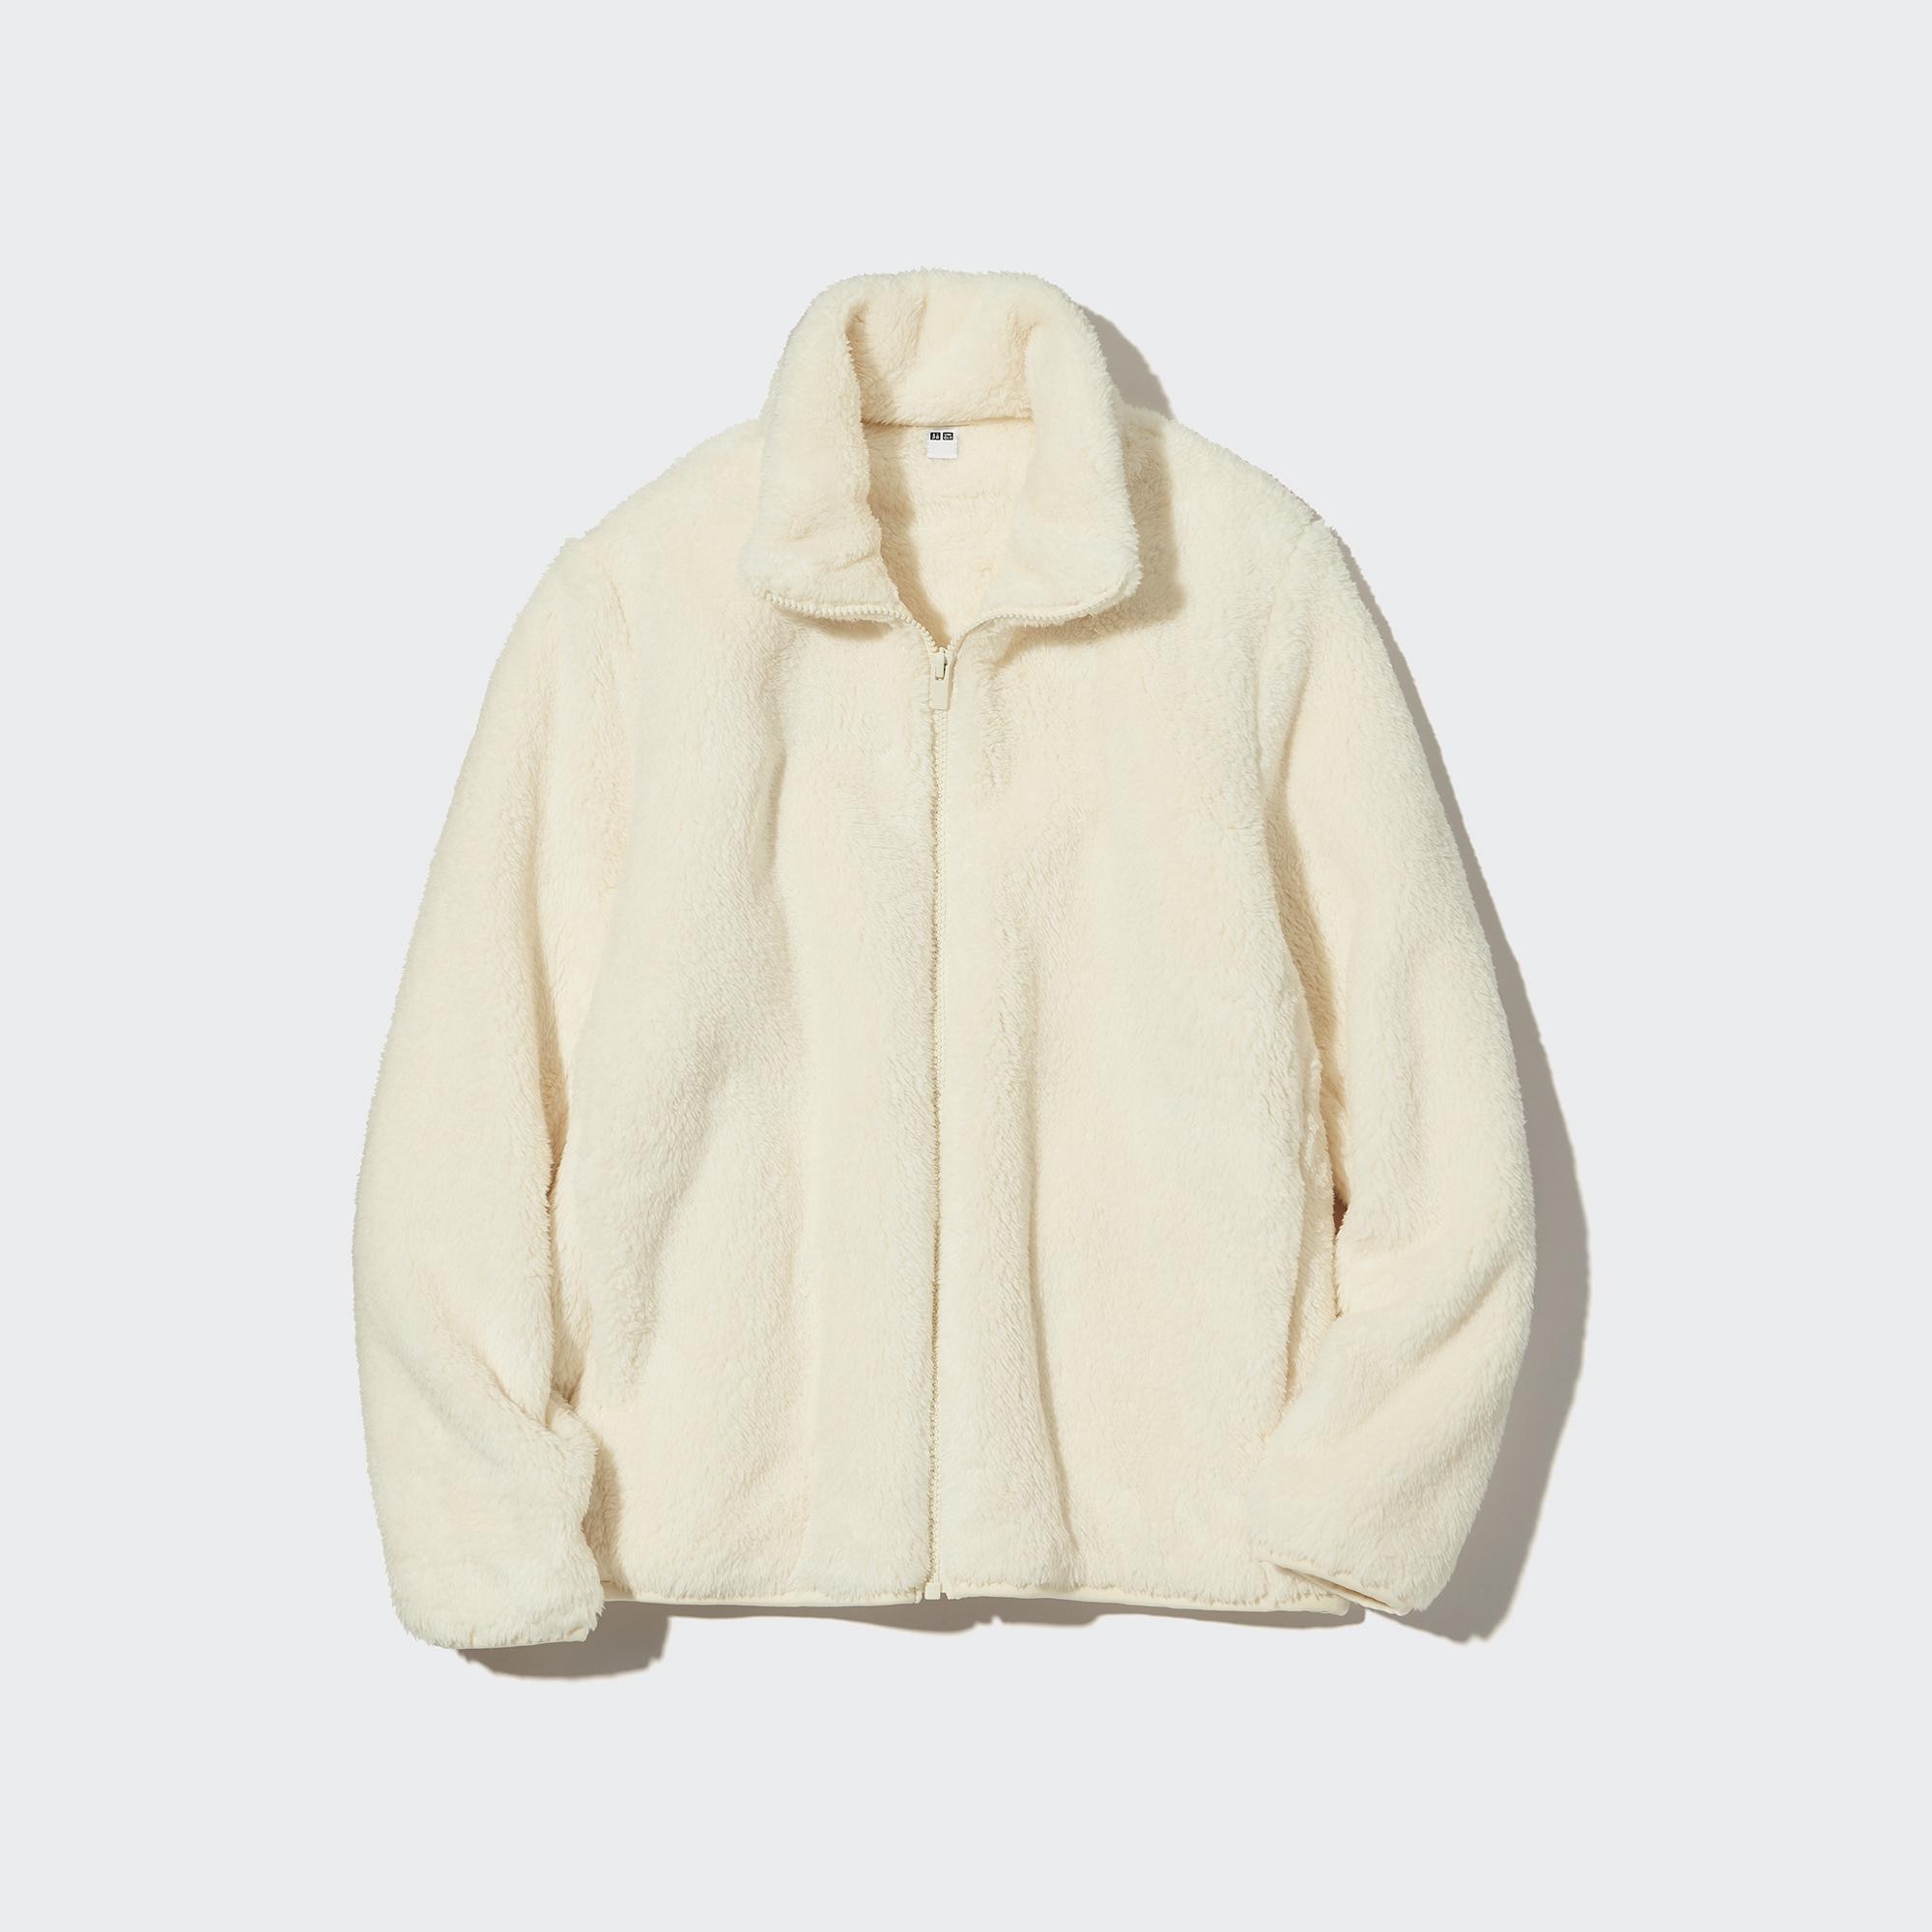 UNIQLO on X: Back and better than ever: Uniqlo Fleece! This